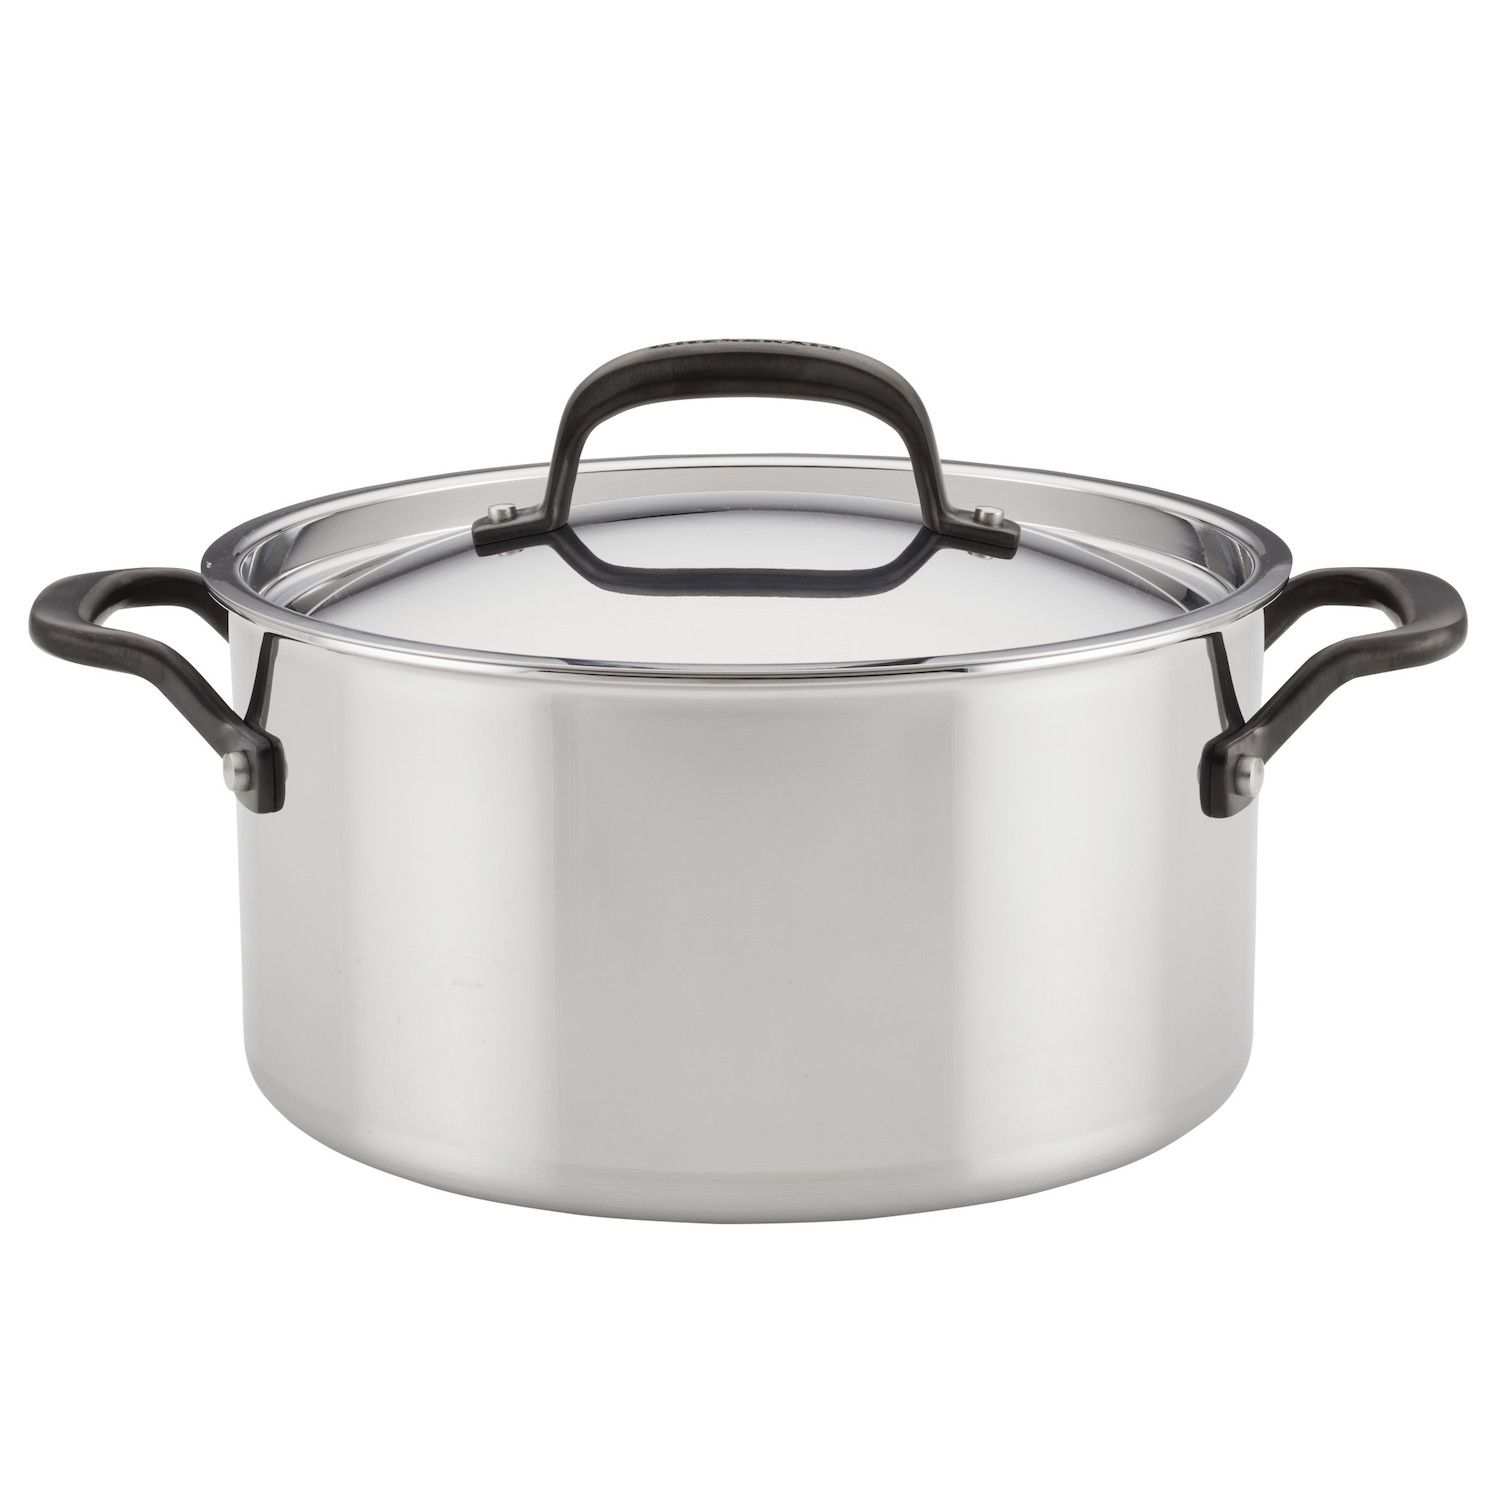 NutriChef Cooking Pot Lid 2.5 Quart - See-Through Tempered Glass Lids,  Stainless Steel Rim, Dishwasher Safe